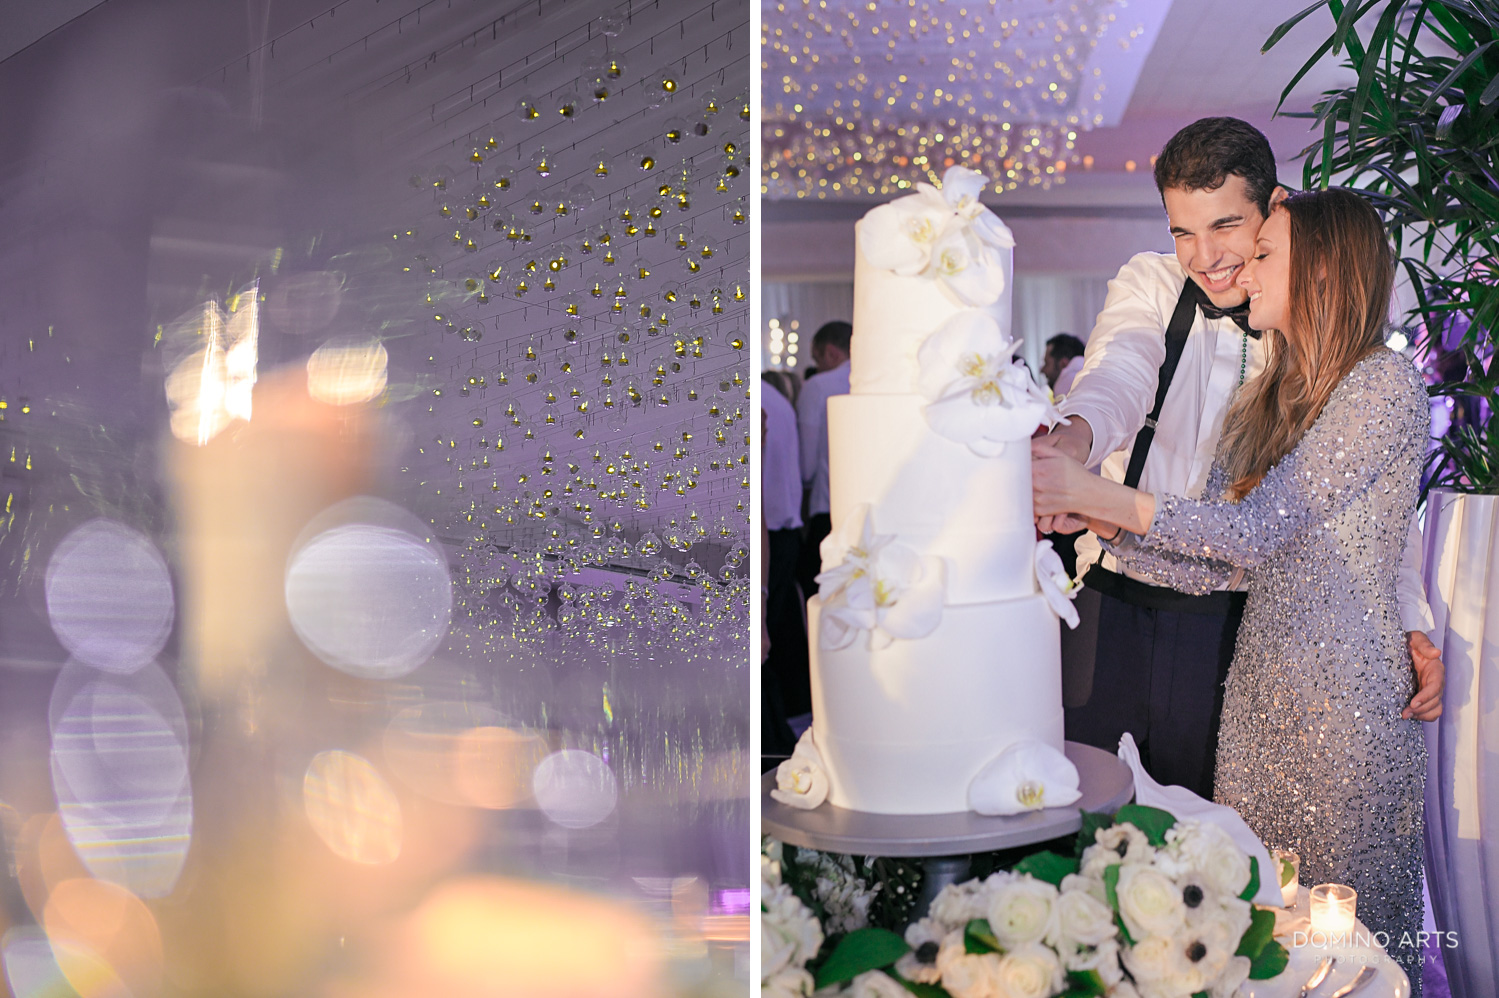 Fun wedding cake cutting pictures at fontainebleau miami